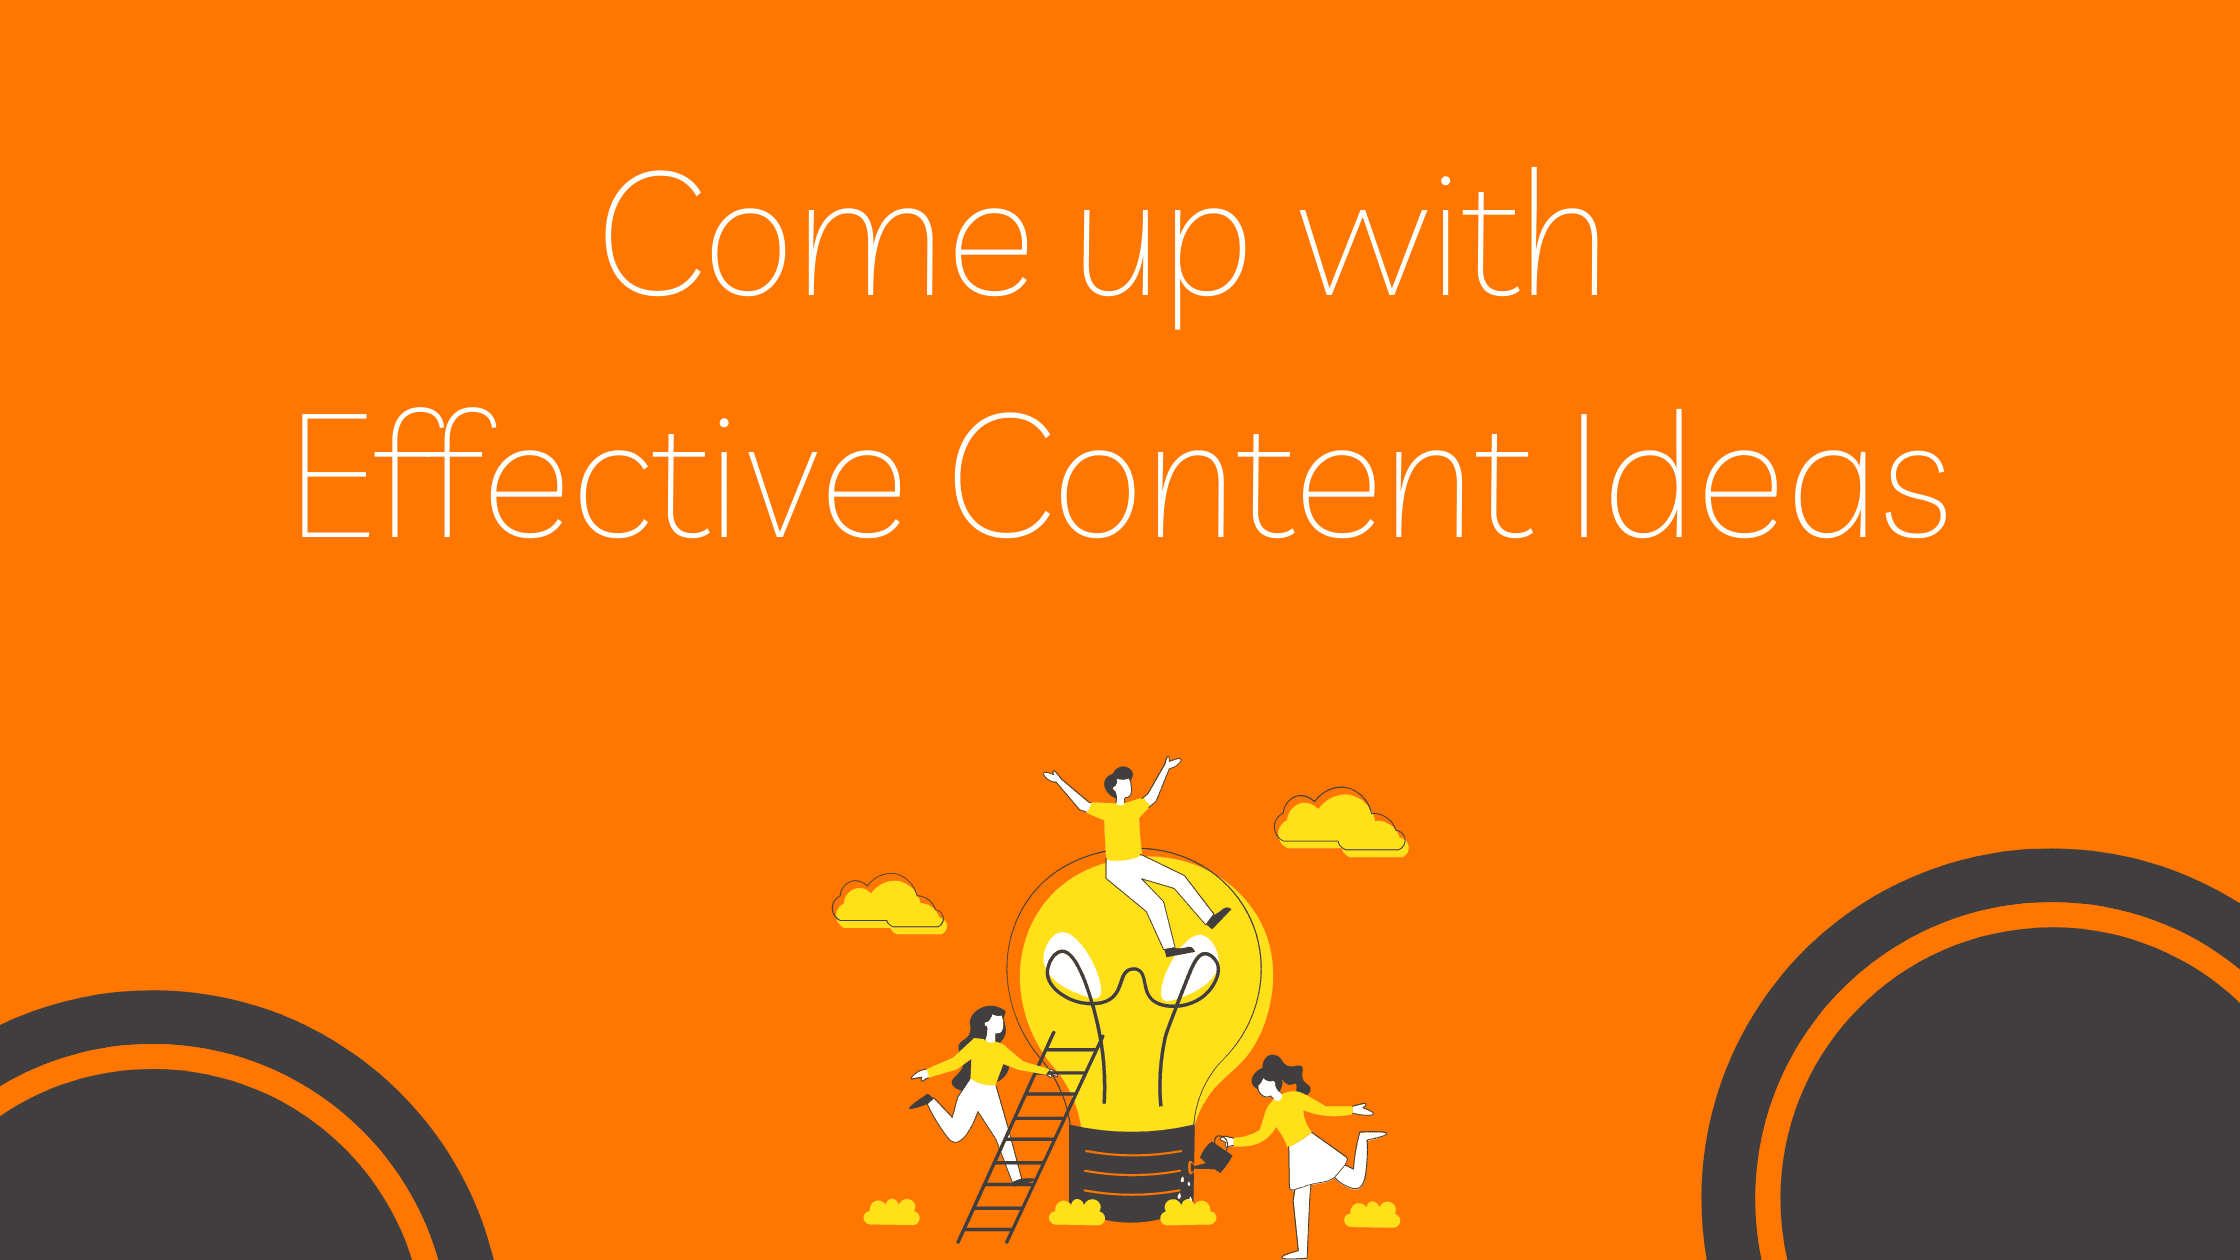 Come up with Effective Content Ideas